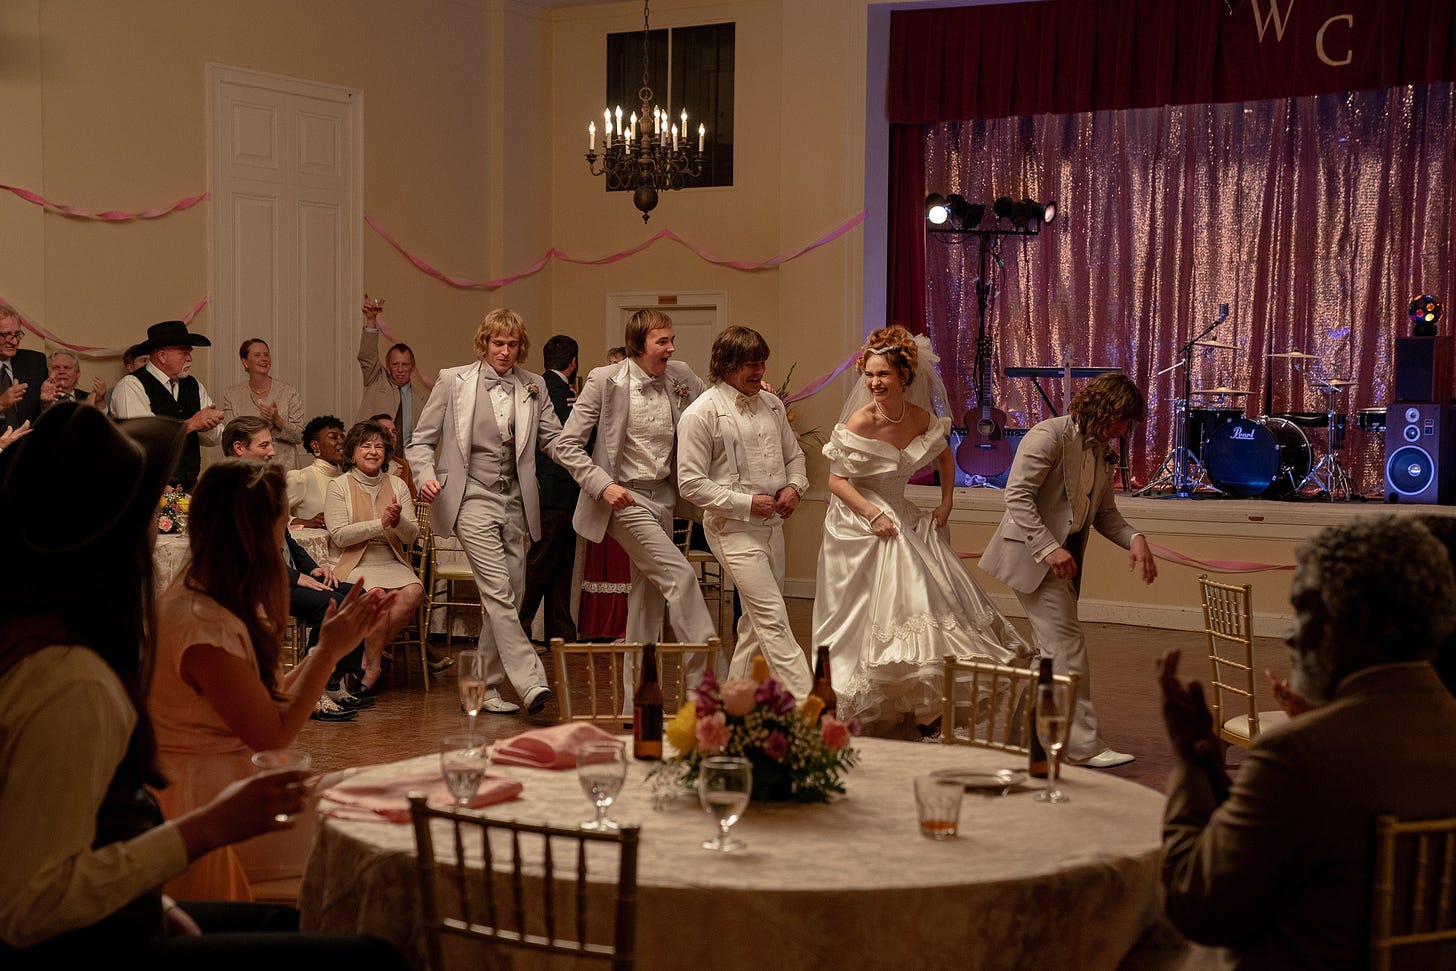 Still from “The Iron Claw” depicting five people linedancing at a wedding.